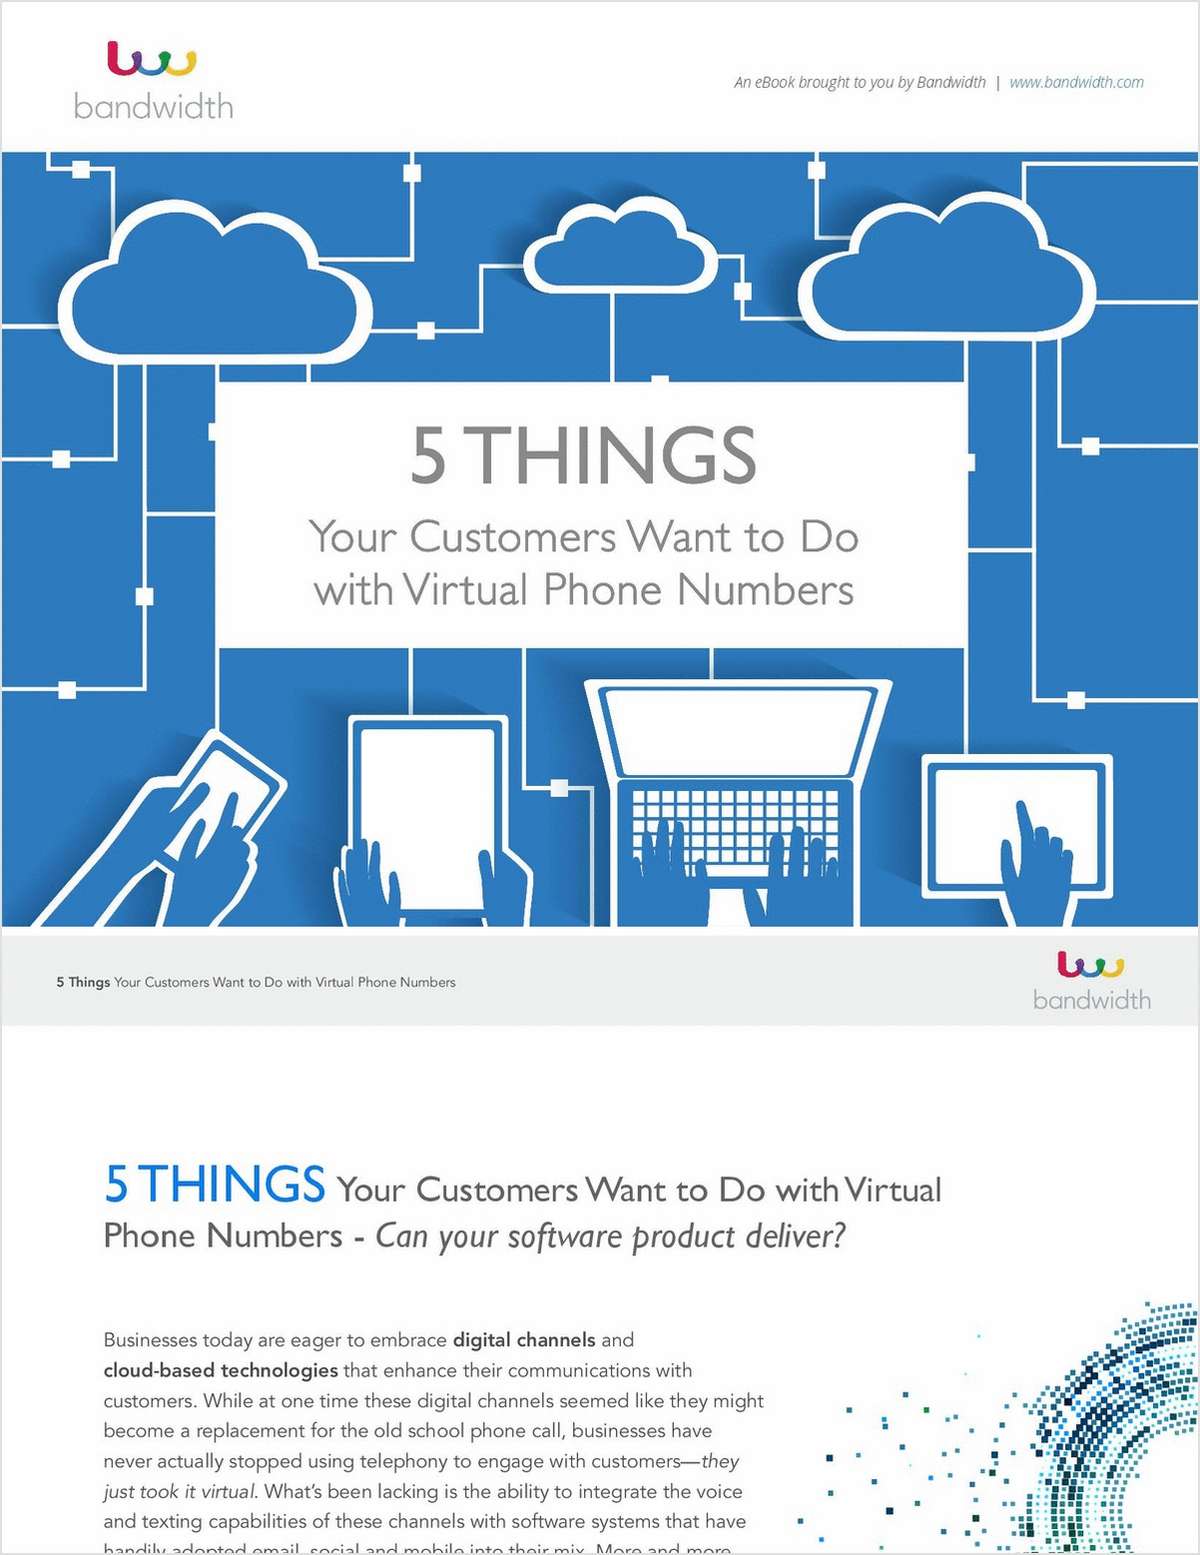 5 Things Your Customers Want to Do with Virtual Phone Numbers